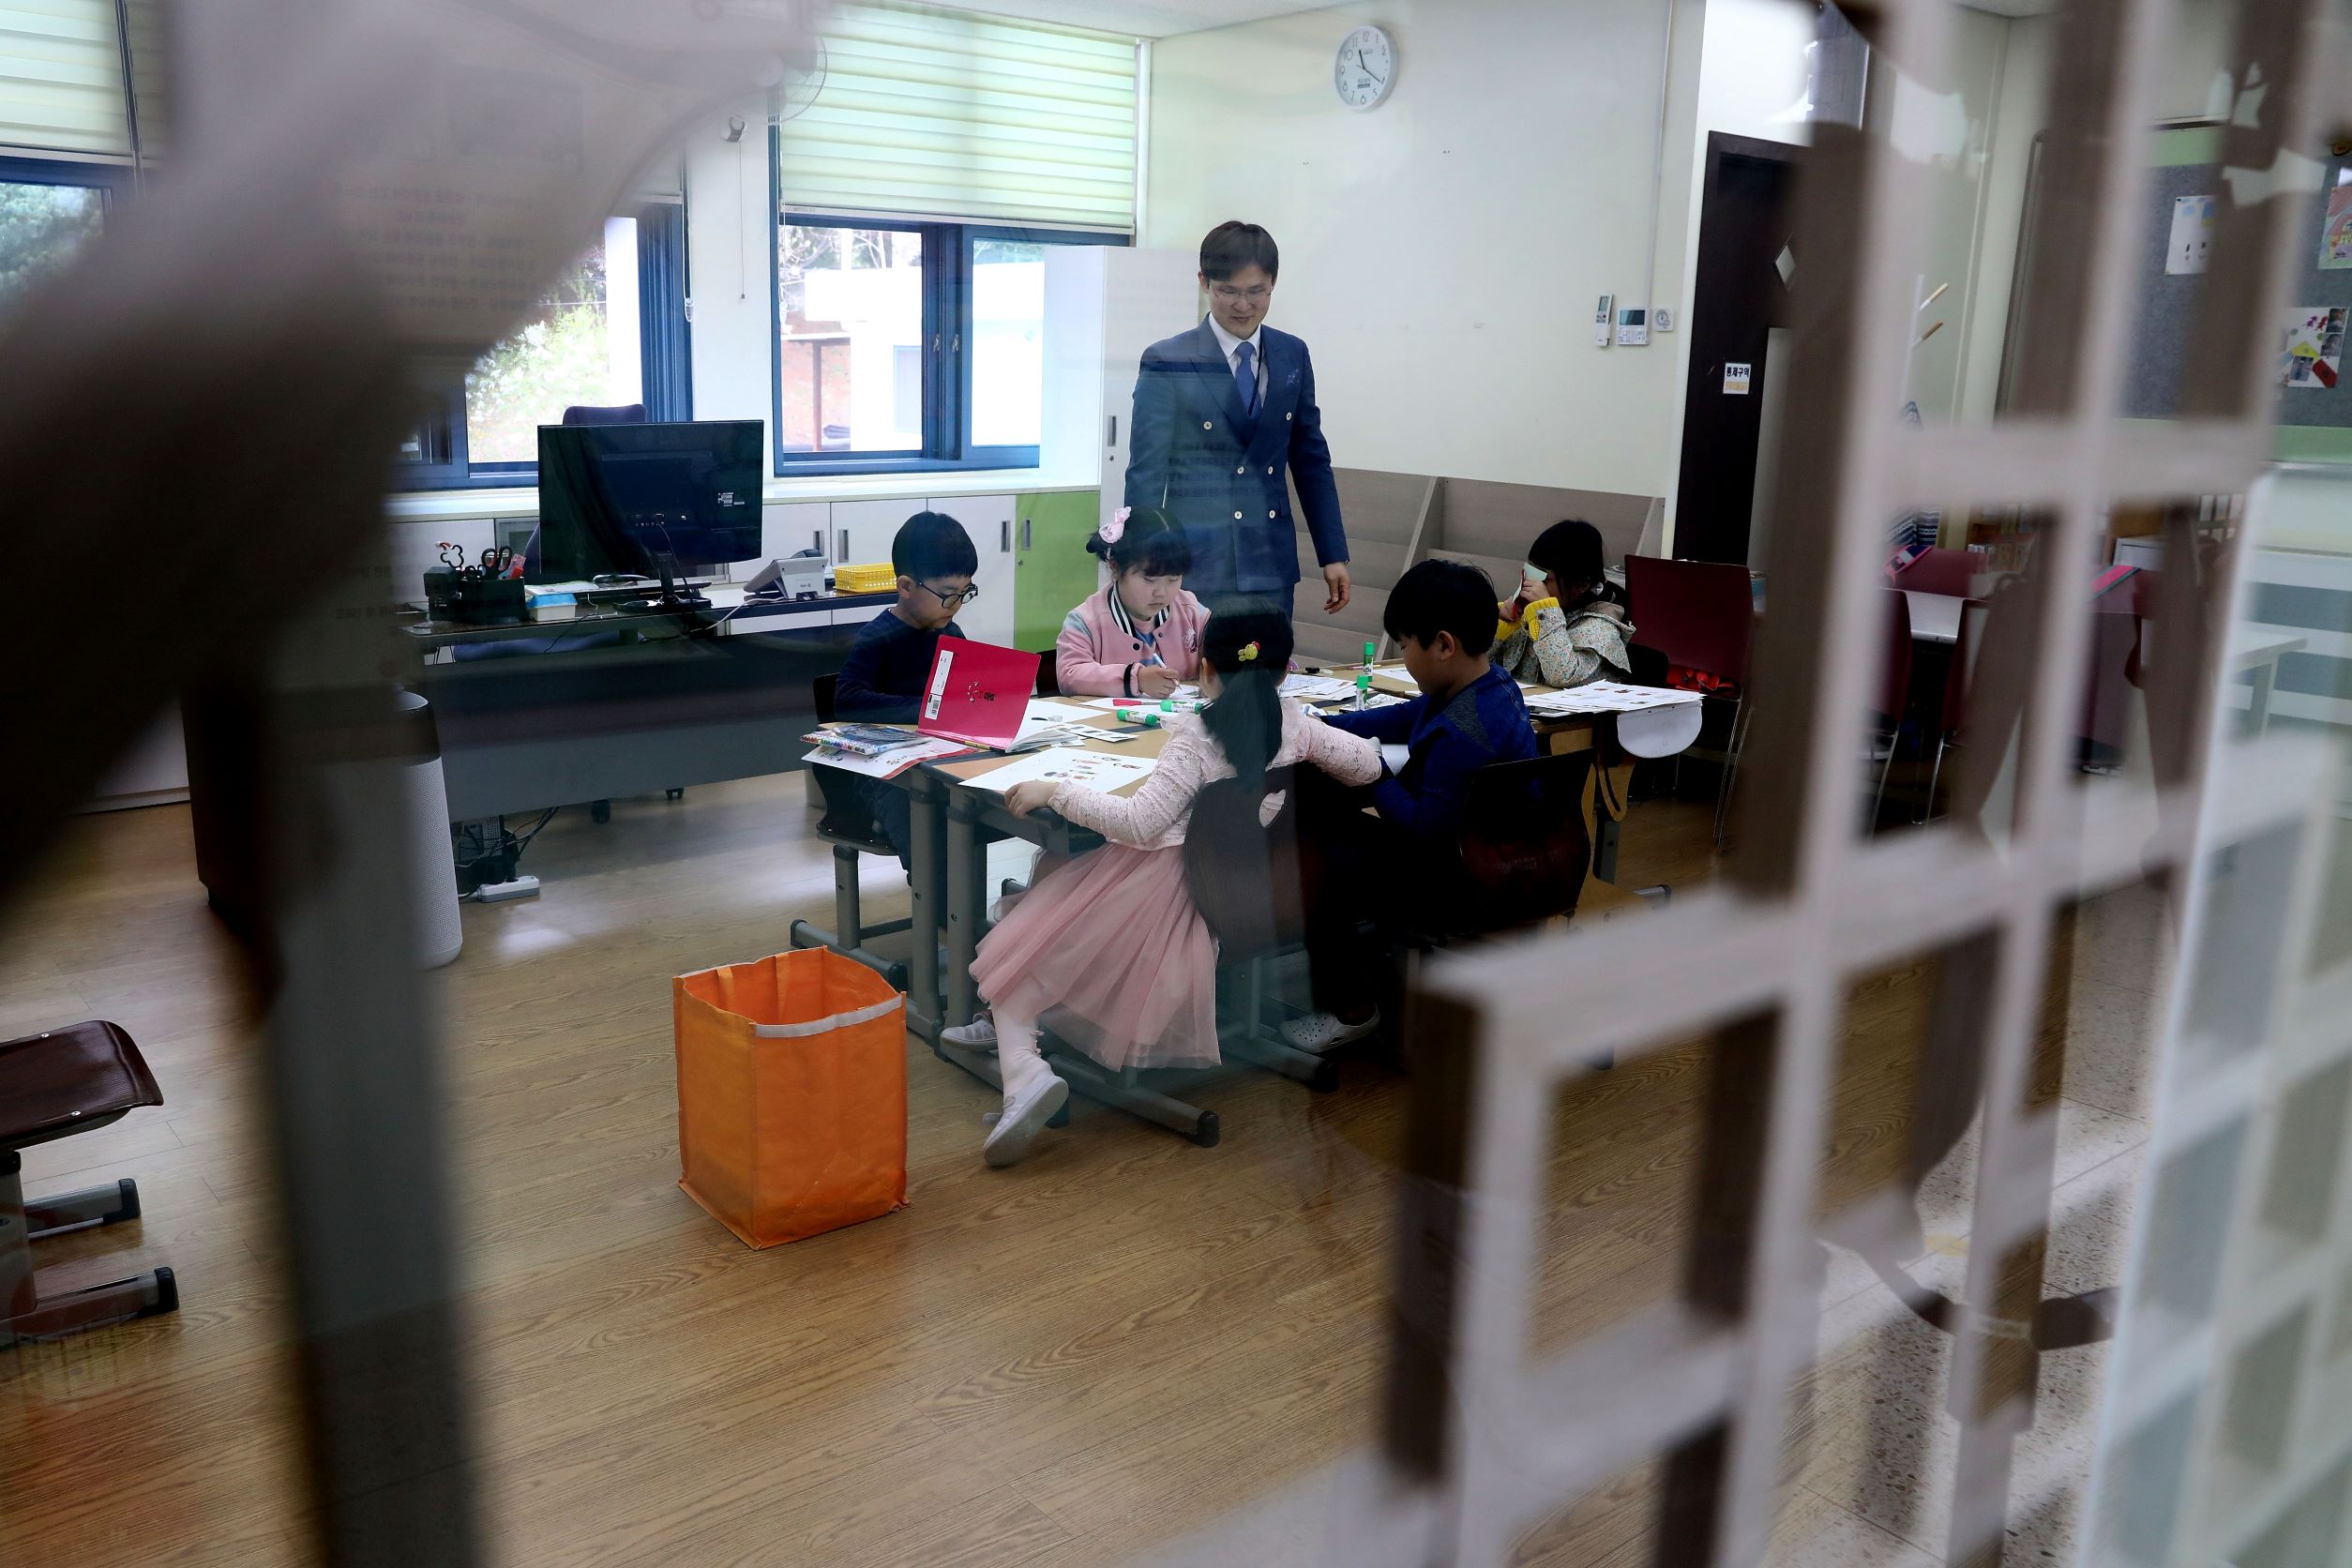 South Korea’s Education Minister Steps Down Amid Uproar Over Plan to Lower School Entry Age